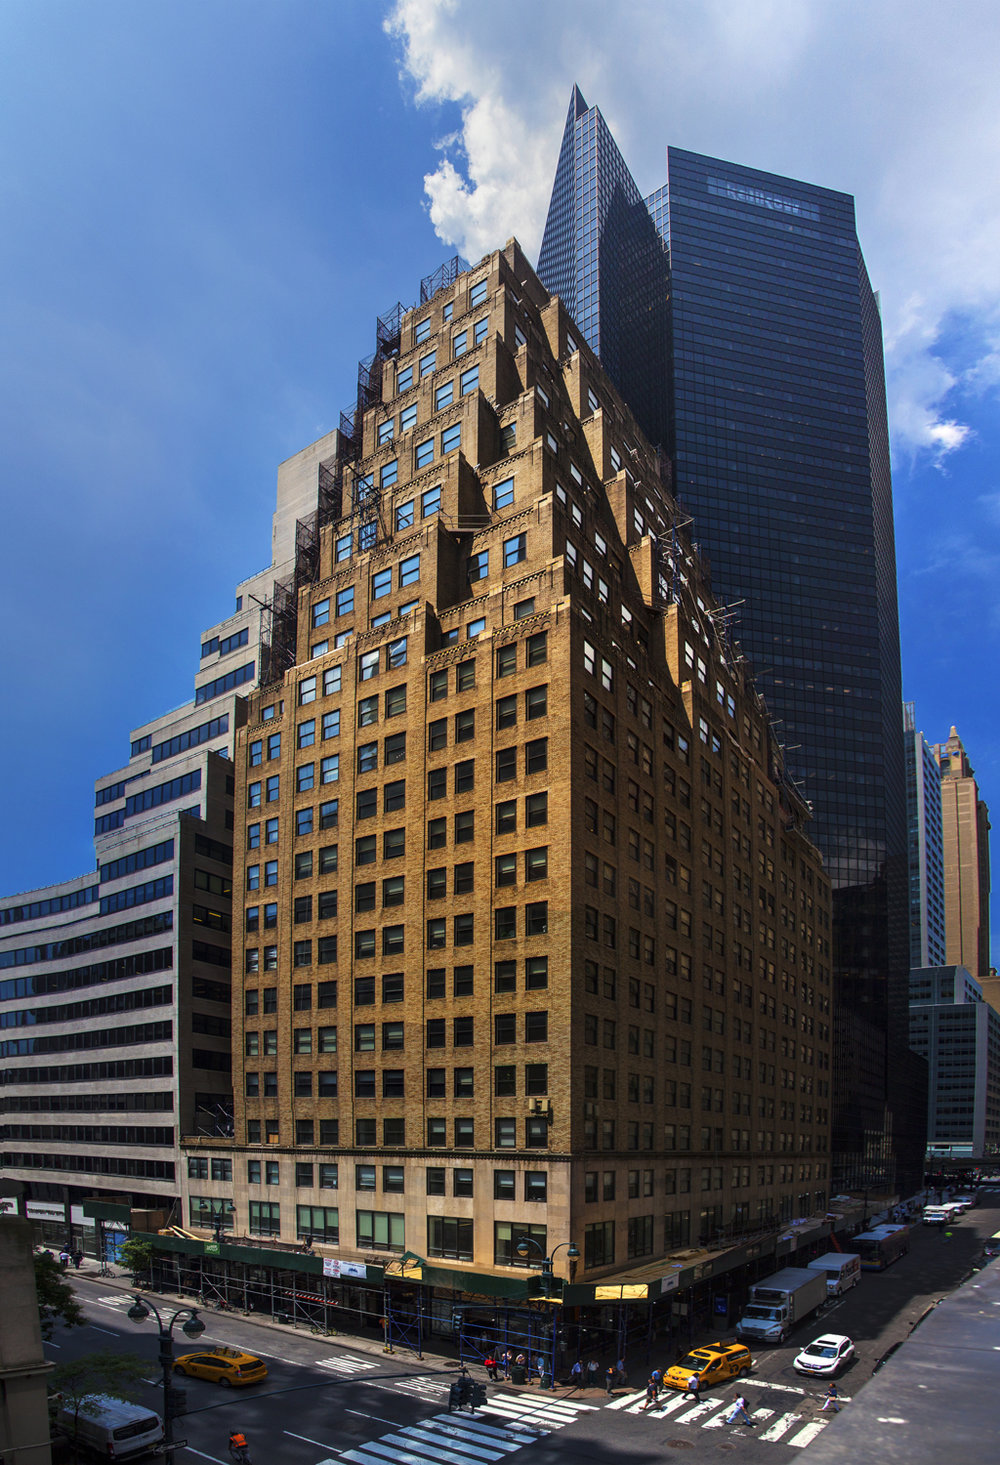 cushman-and-wakefield-commercial-real-estate-photographer-nyc-commercial-real-estate-photography-katrina-eugenia-photography-architectural-photography-nyc09.jpg